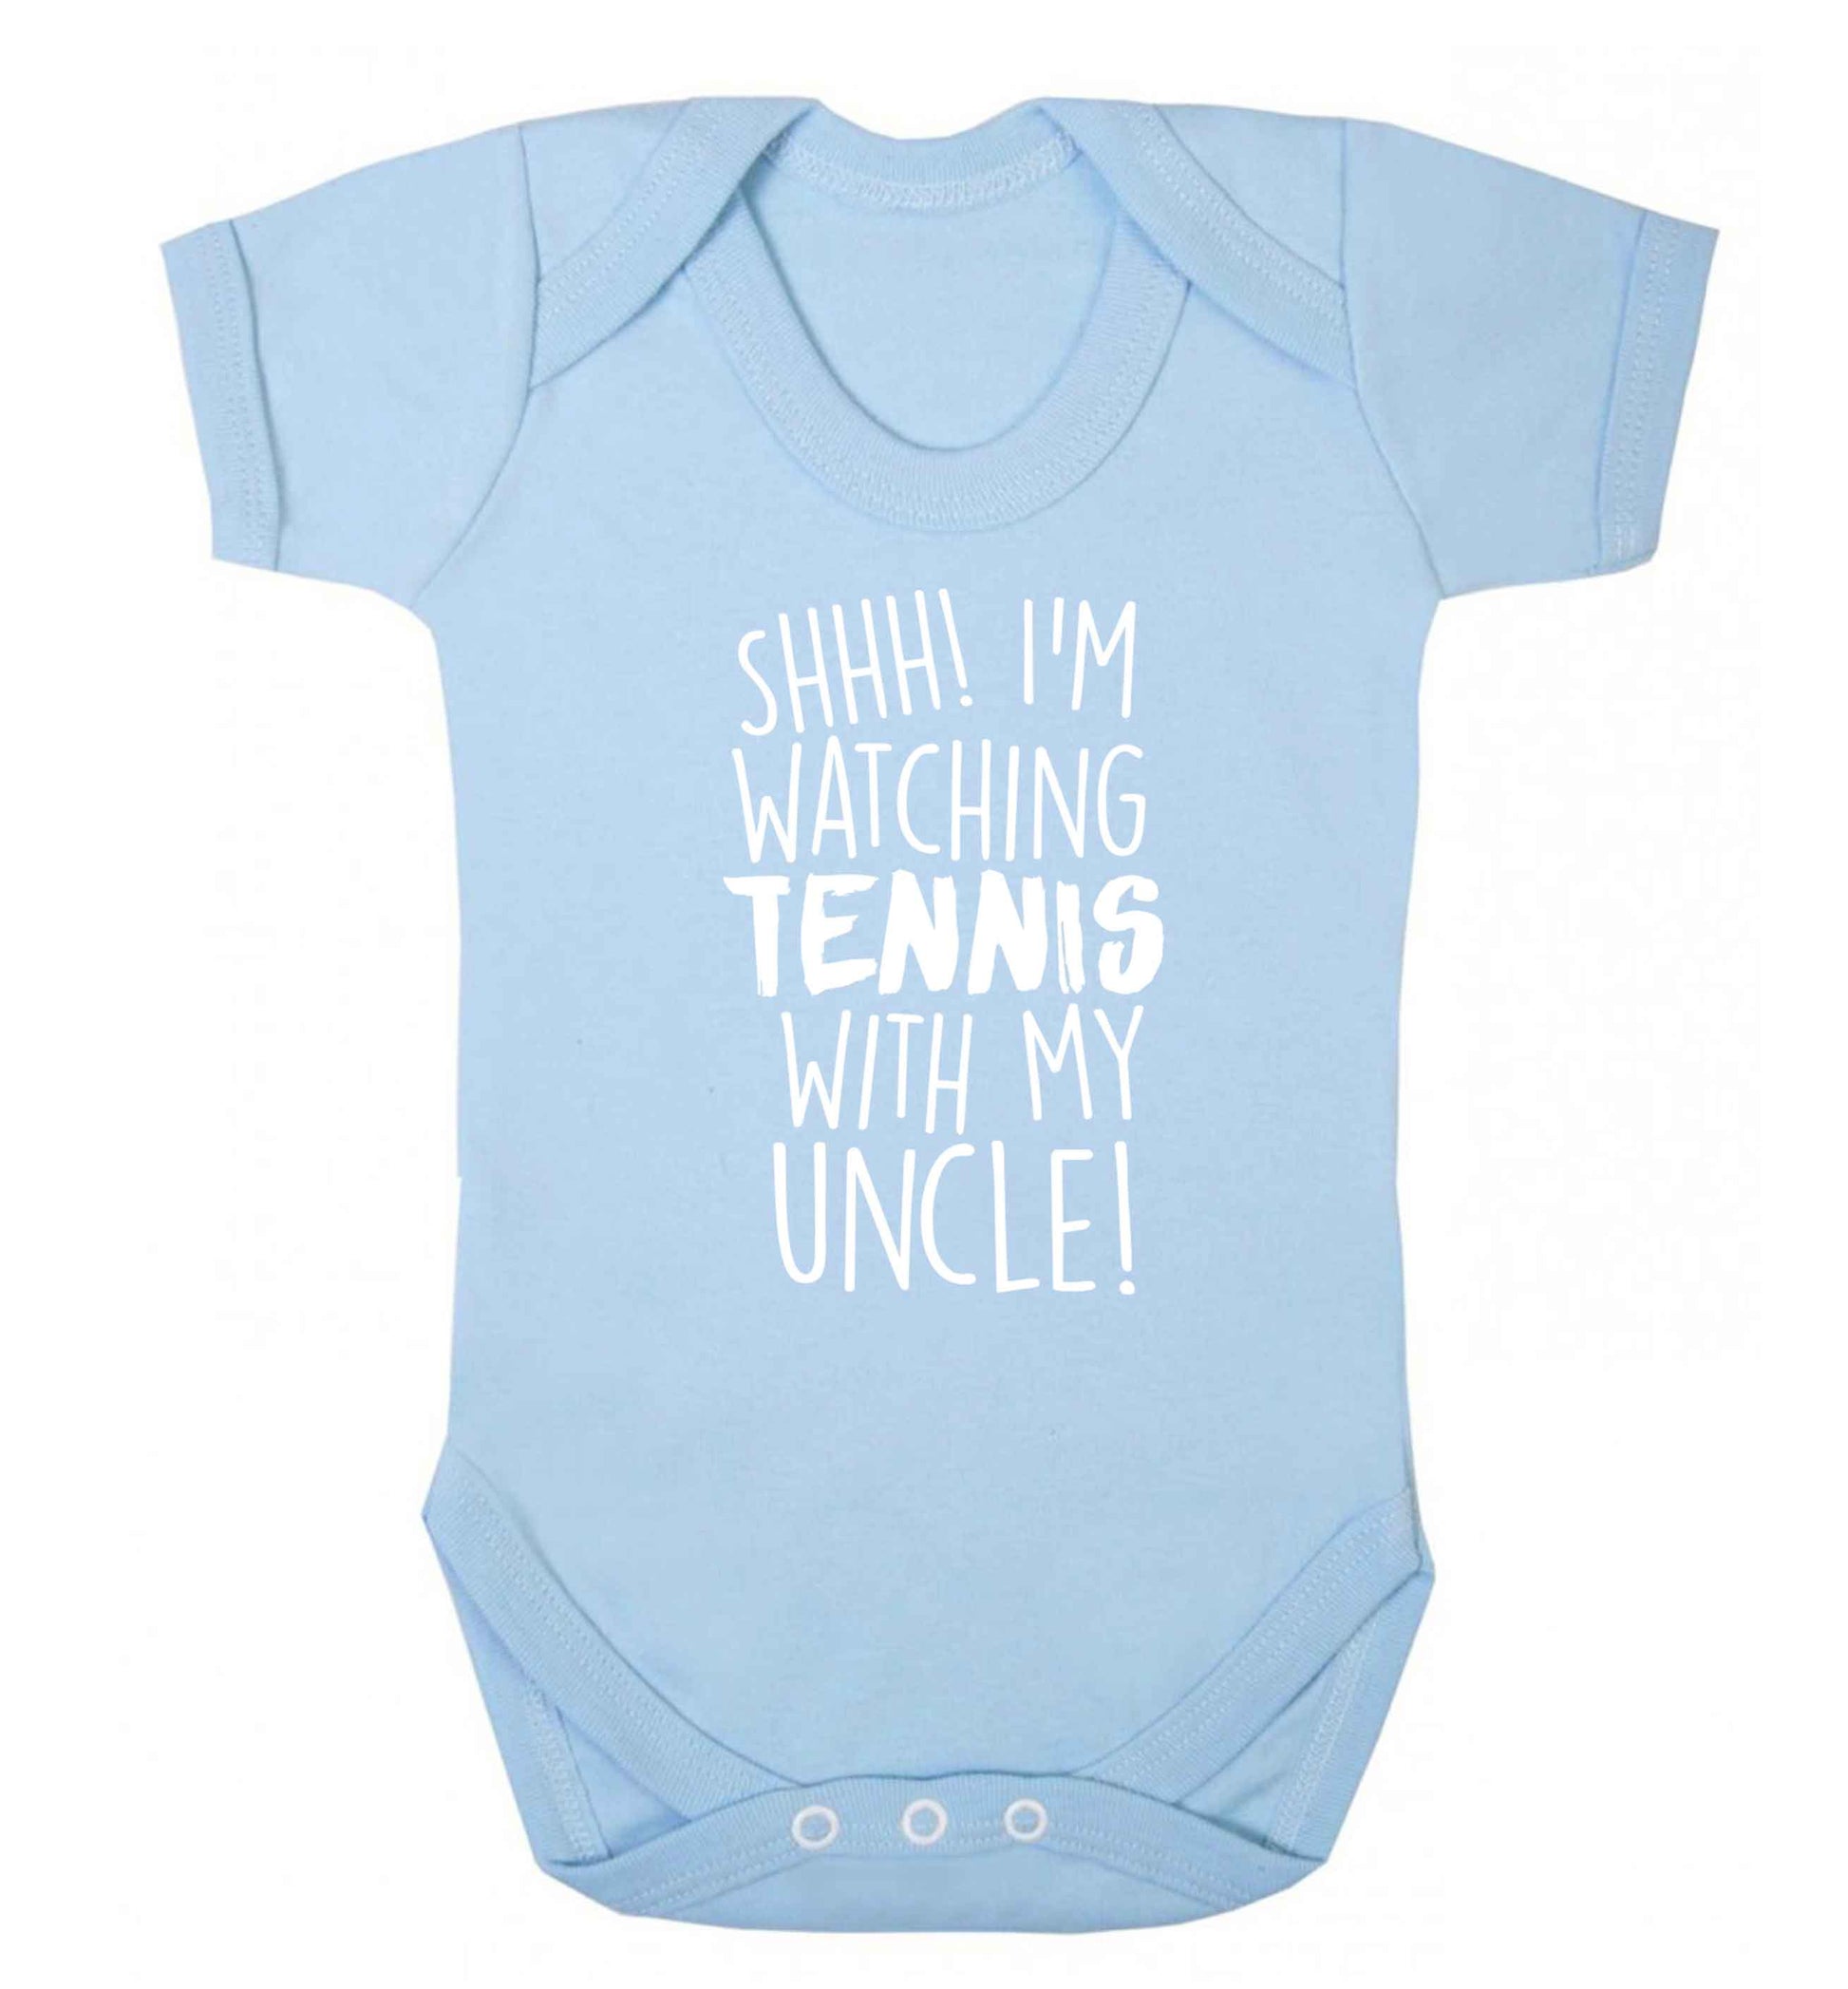 Shh! I'm watching tennis with my uncle! Baby Vest pale blue 18-24 months